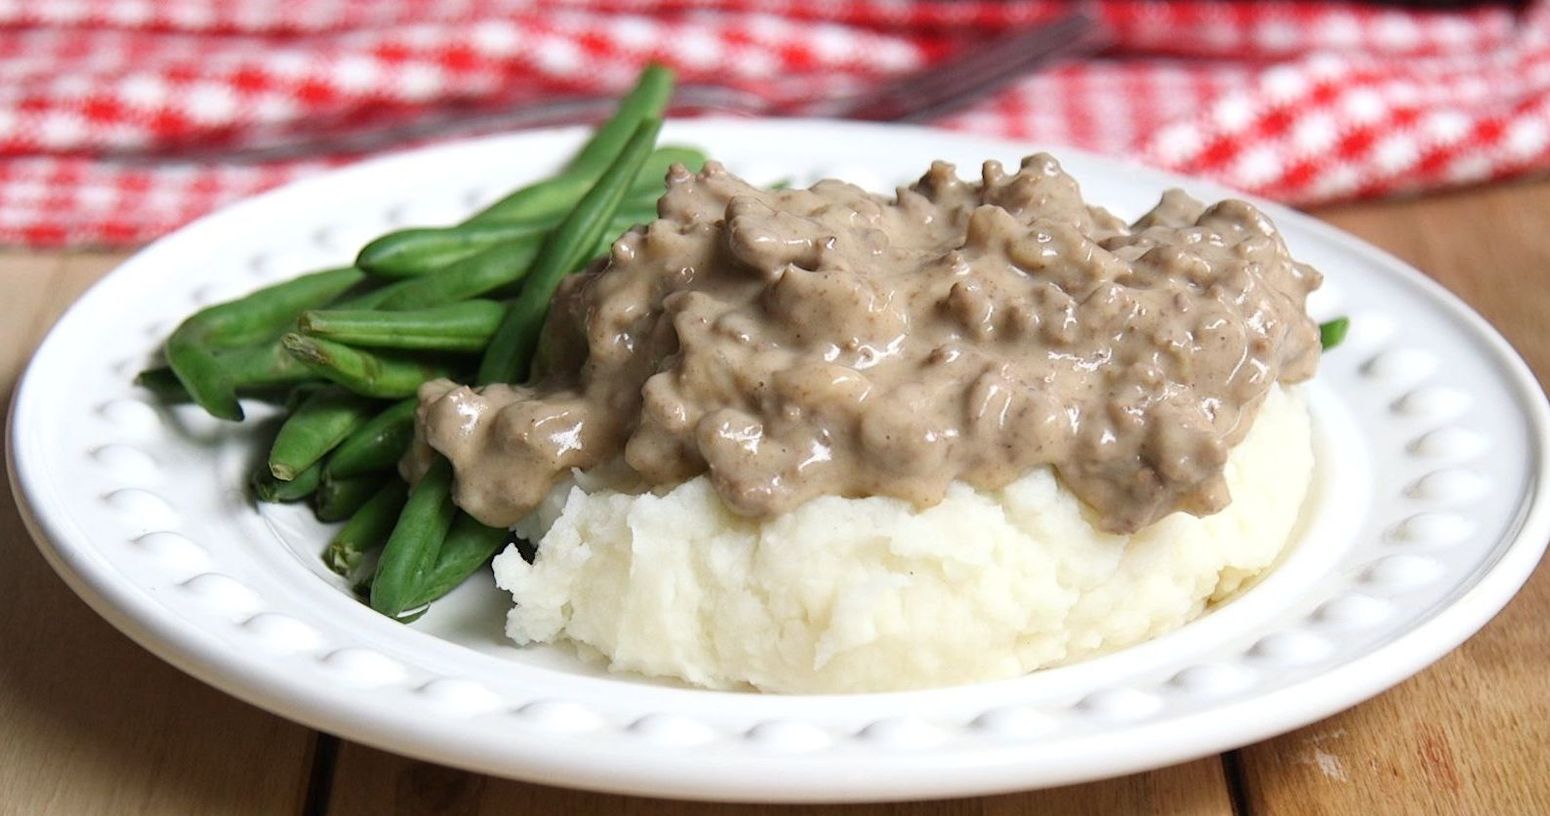 This Hamburger Gravy Recipe Is Delicious And Easy To Make